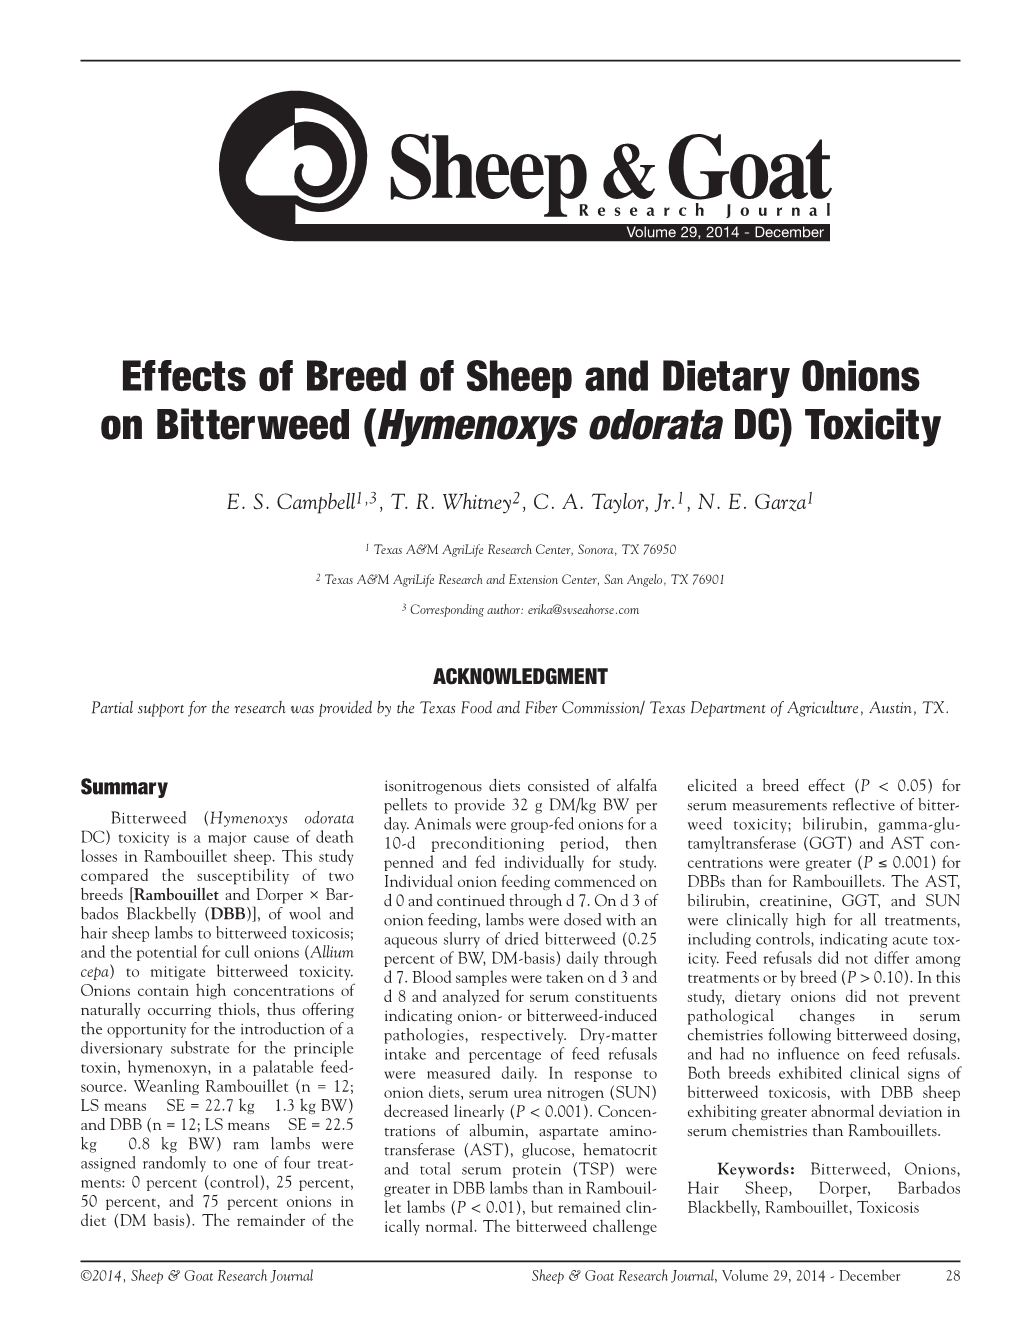 Effects of Breed of Sheep and Dietary Onions on Bitterweed (Hymenoxys Odorata DC) Toxicity